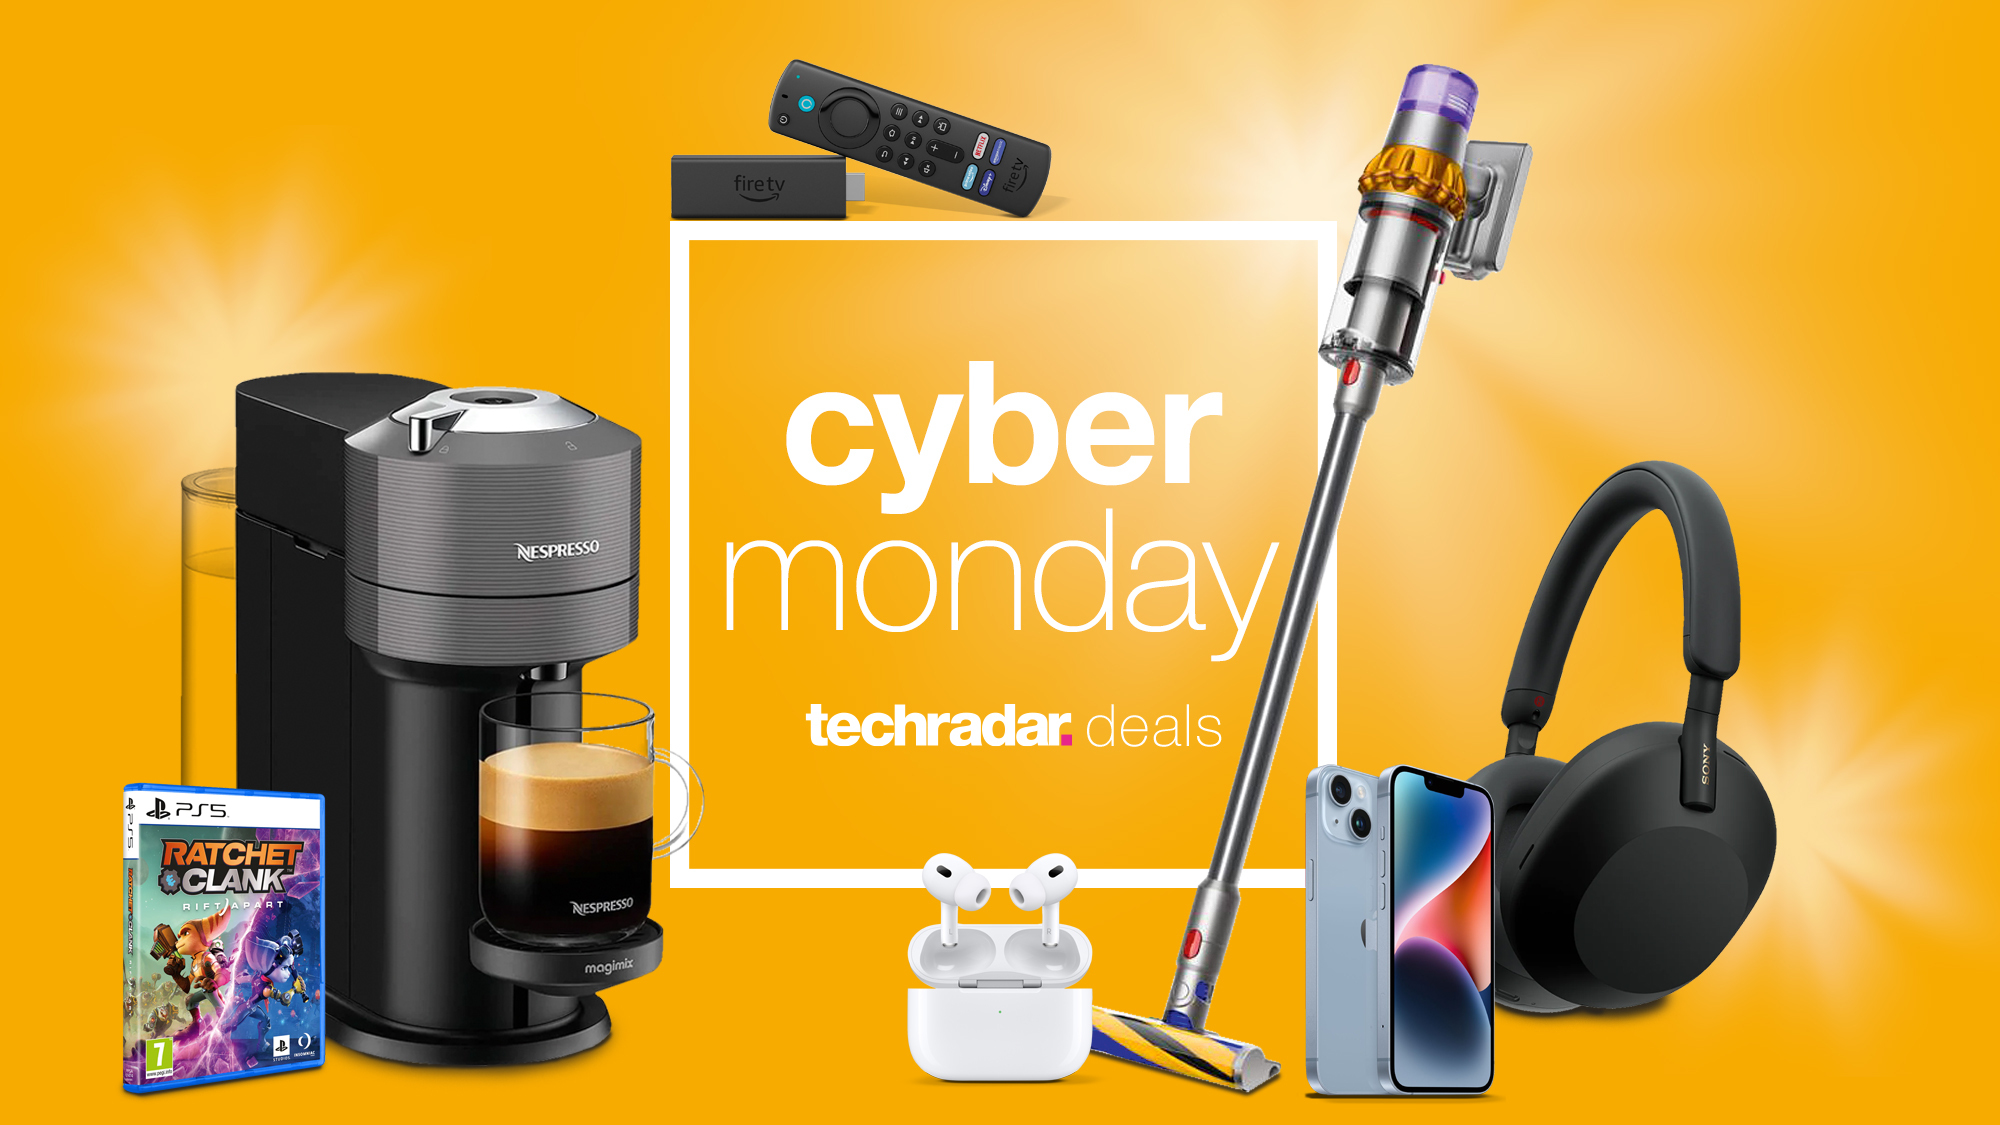 Cyber Monday 2022 has started at Amazon - see all this weekend's best deals